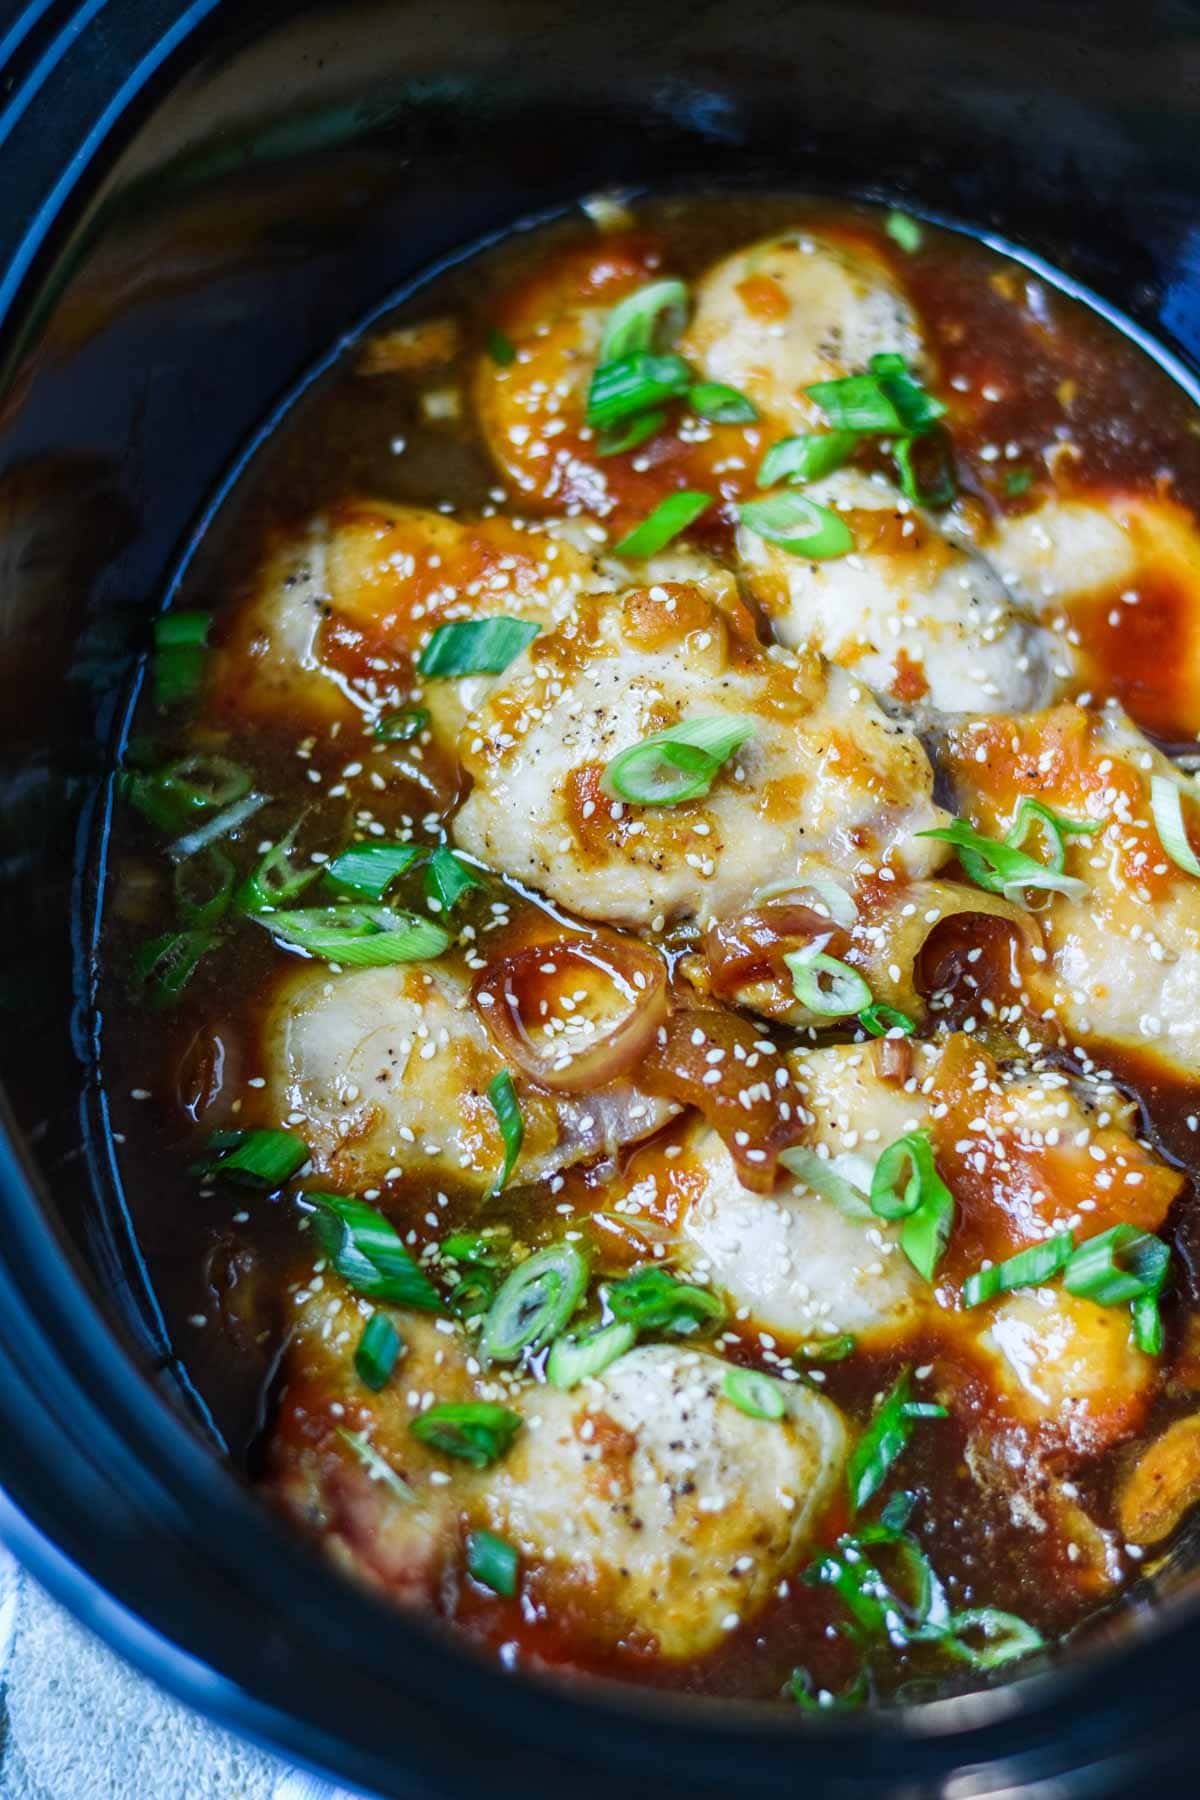 Chicken with shallots and apricot jam in a crock pot.